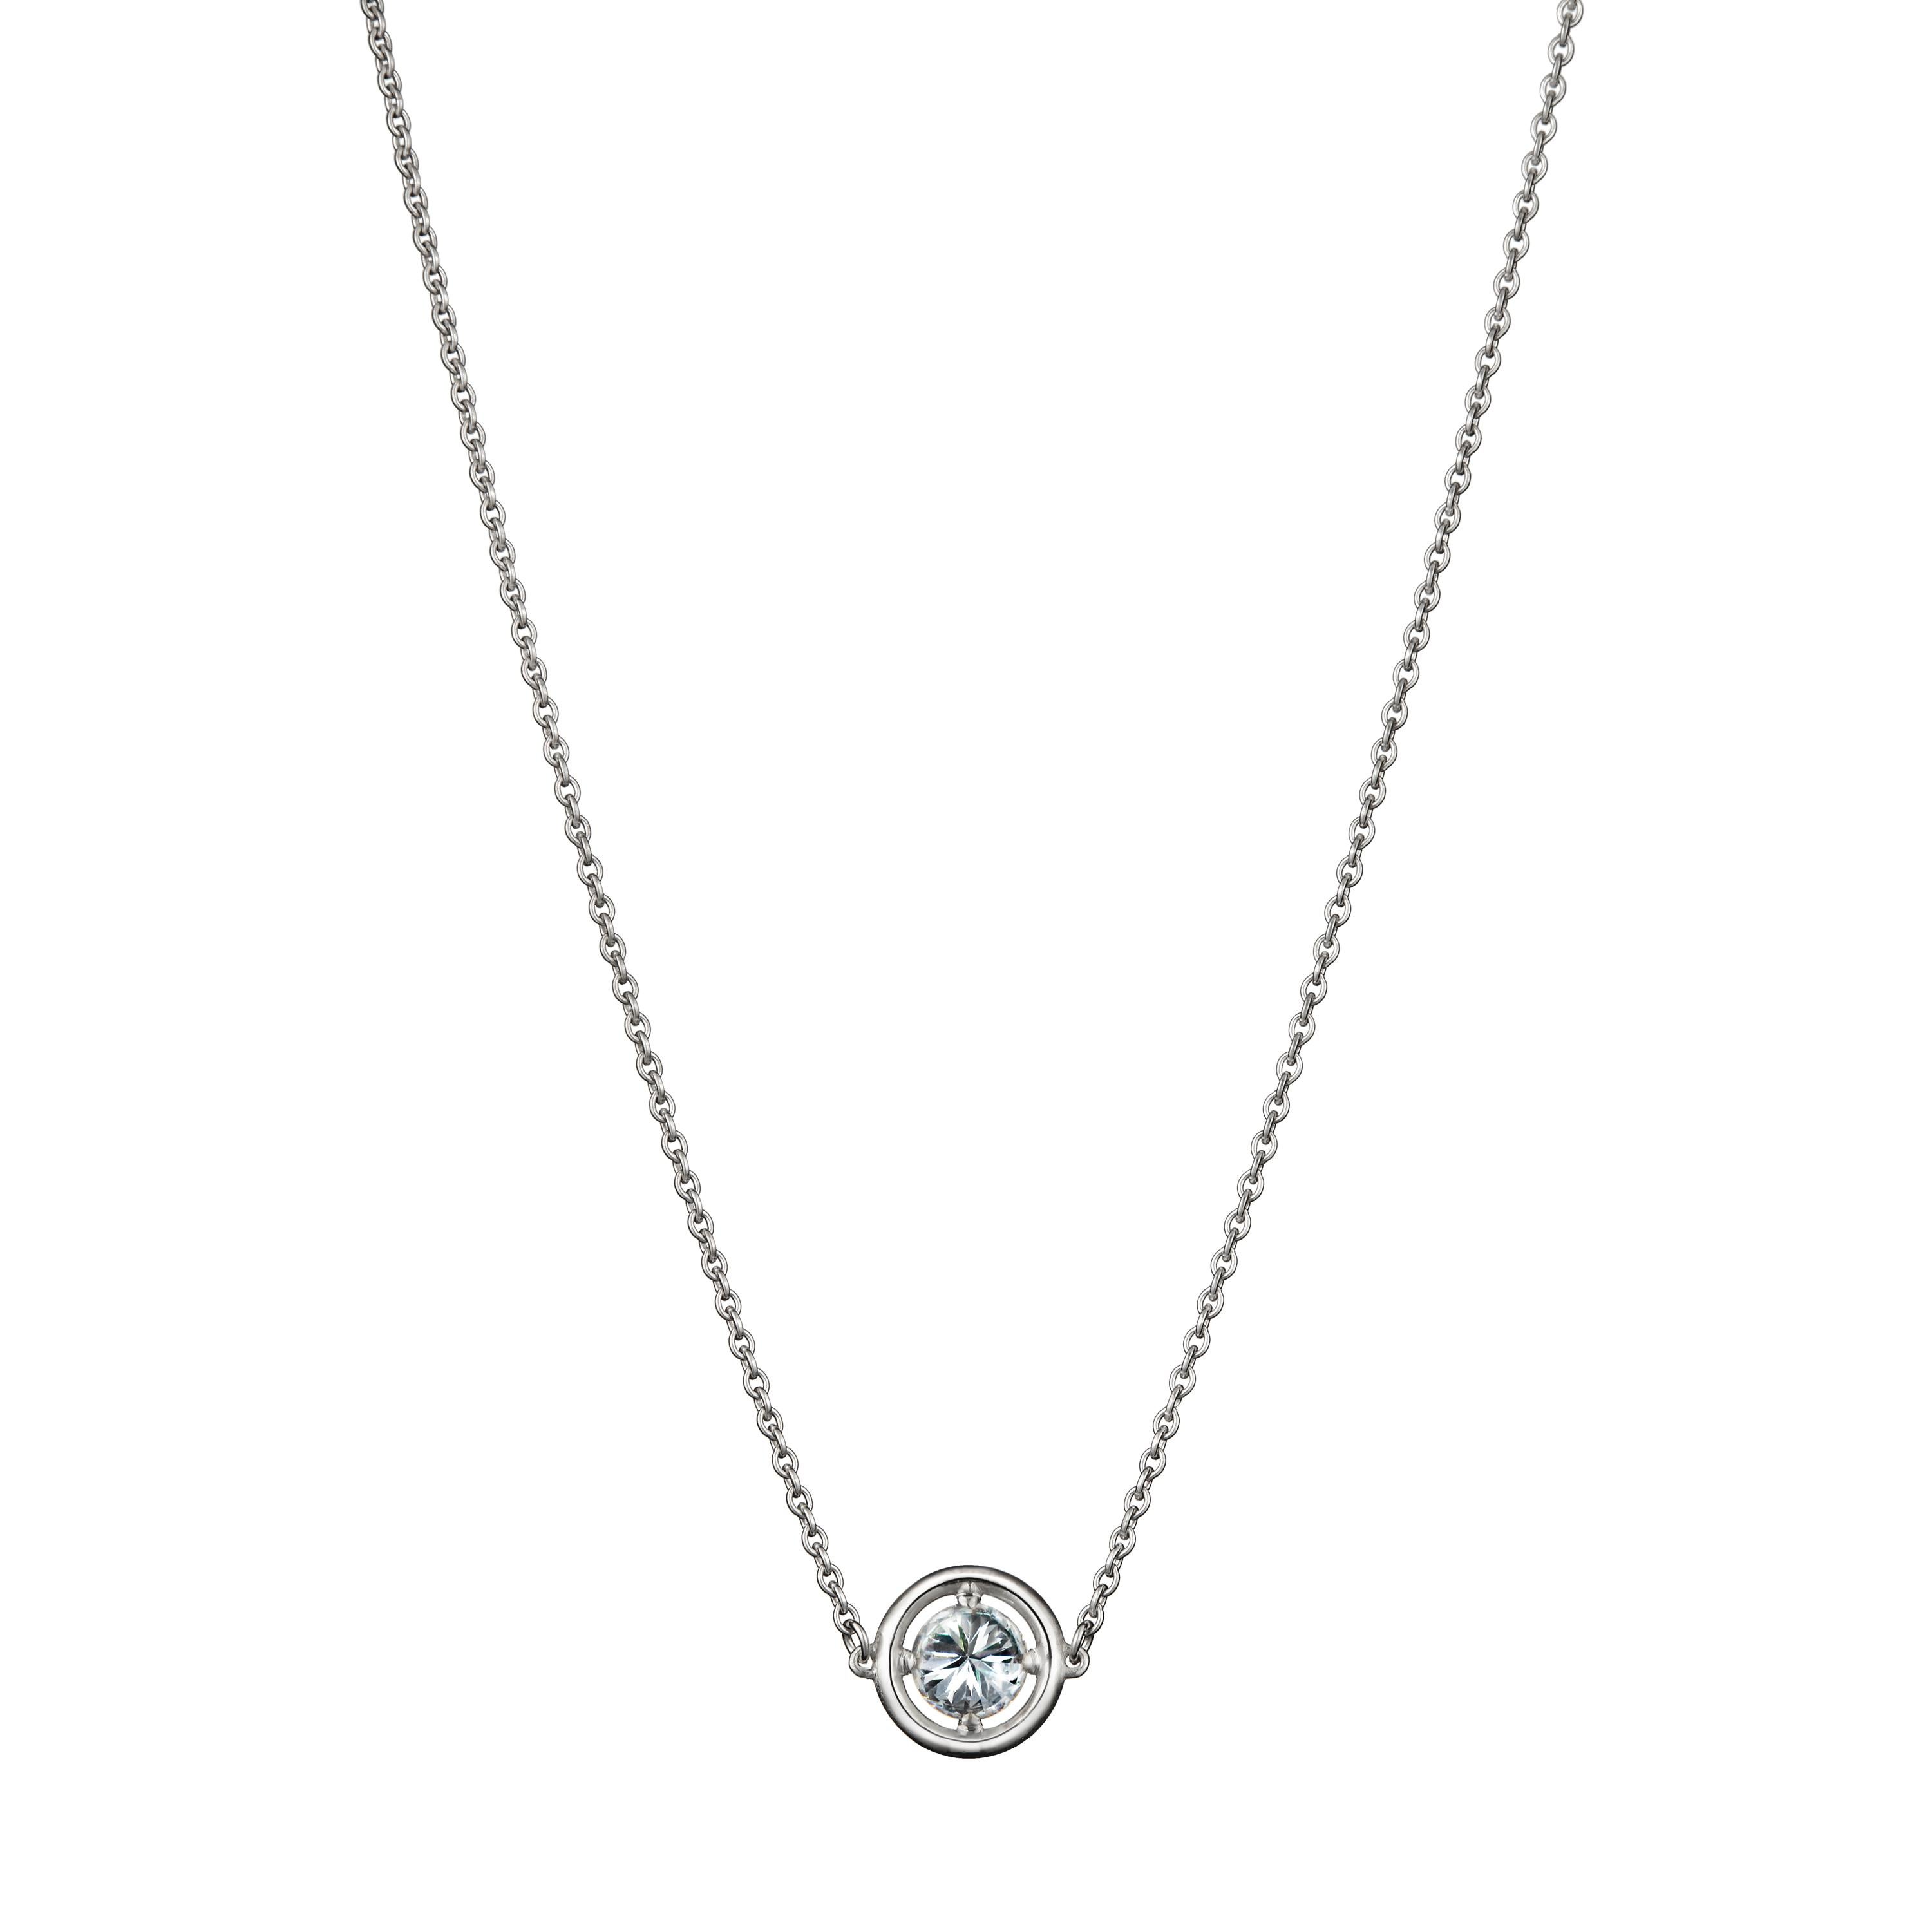 The No.1 Solitaire Pendant is designed to maximise the brilliance and luminosity of the diamond. Our distinctive halo is carefully engineered to elevate the diamond, emphasising its size while strengthening and protecting the stone’s integrity. The